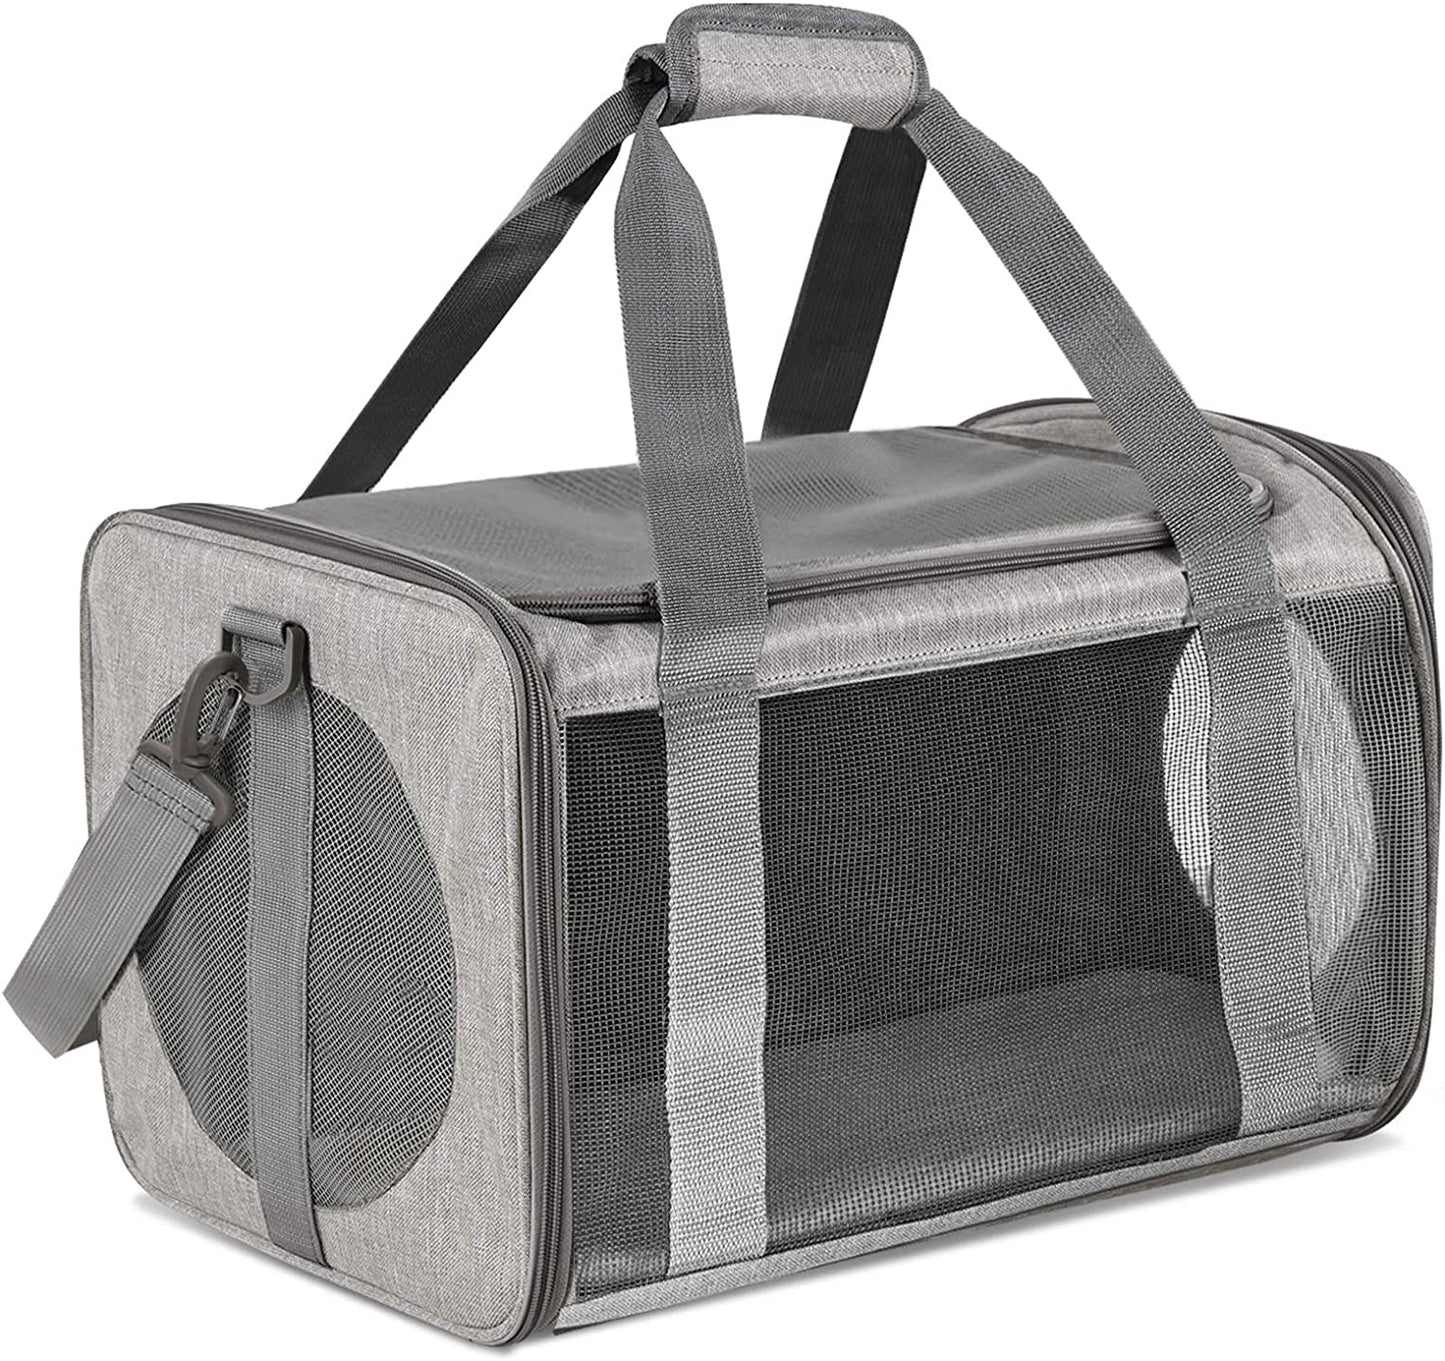 Cat Carriers Dog Carrier Pet Carrier for Small Medium Cats Dogs Puppies up to 15 Lbs, TSA Airline Approved Small Dog Carrier Soft Sided, Collapsible Waterproof Travel Puppy Carrier - Grey